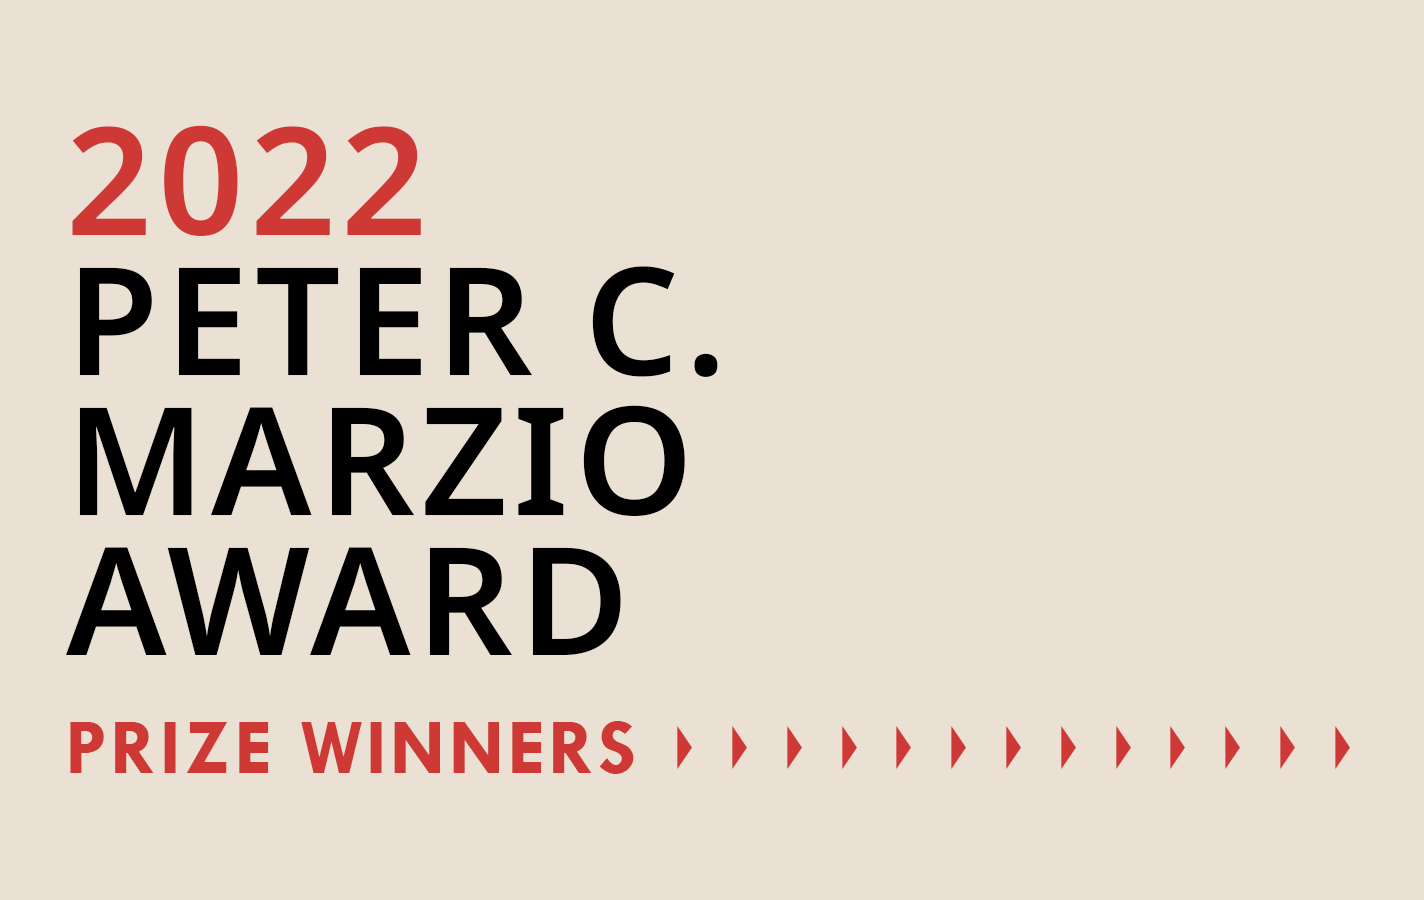 <p><strong>2022 Peter C. Marzio Award Winners Announced</strong></p>
